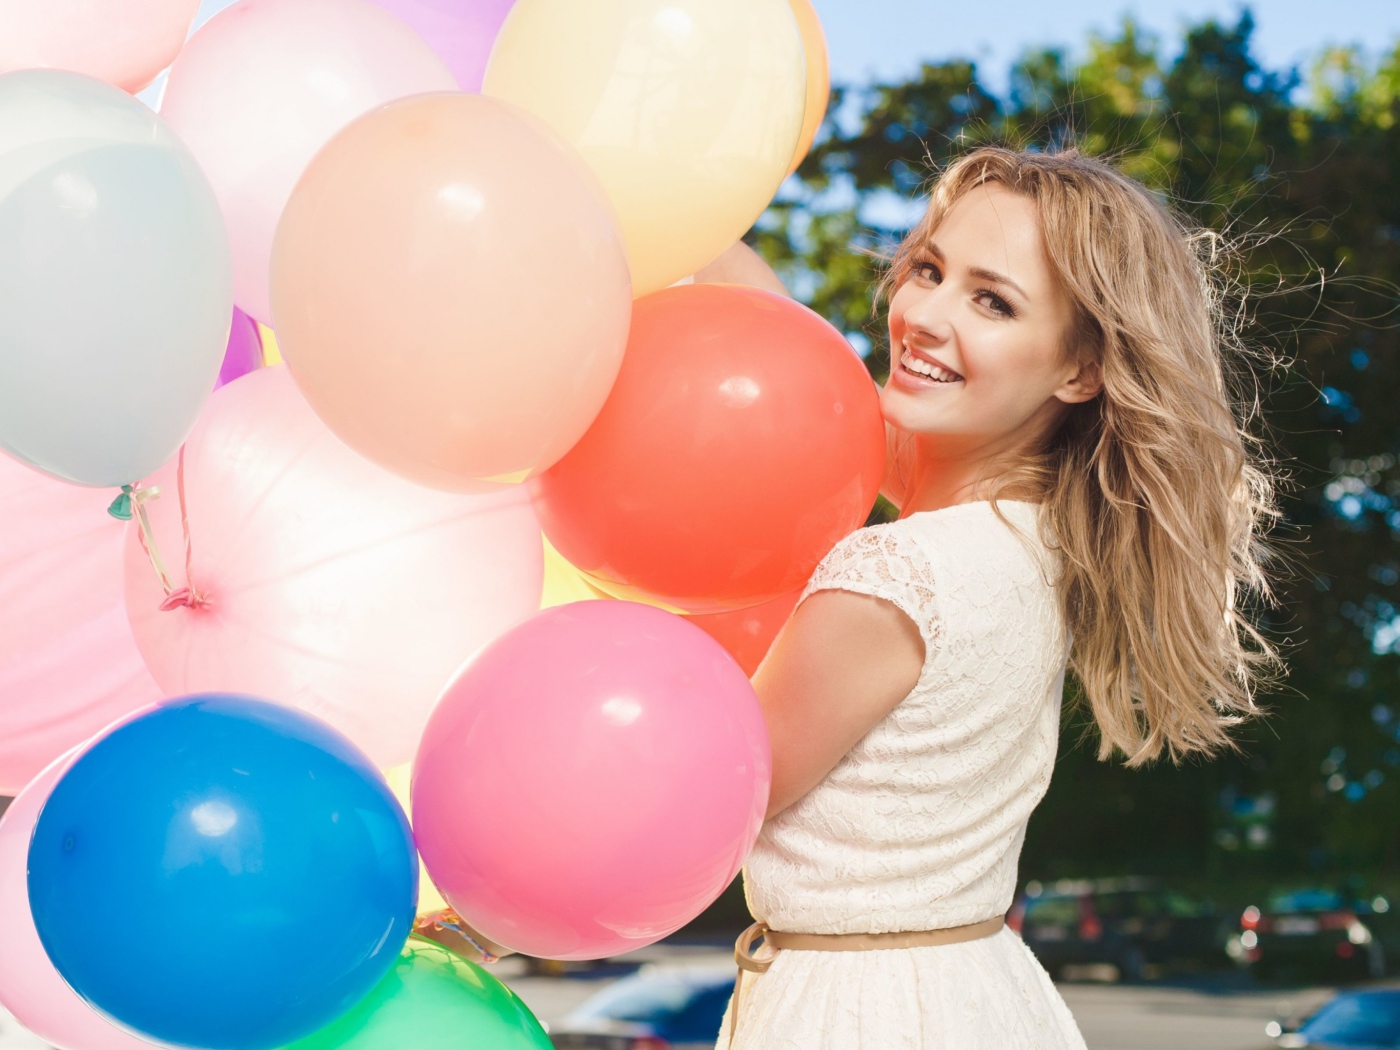 Smiling Girl With Balloons wallpaper 1400x1050